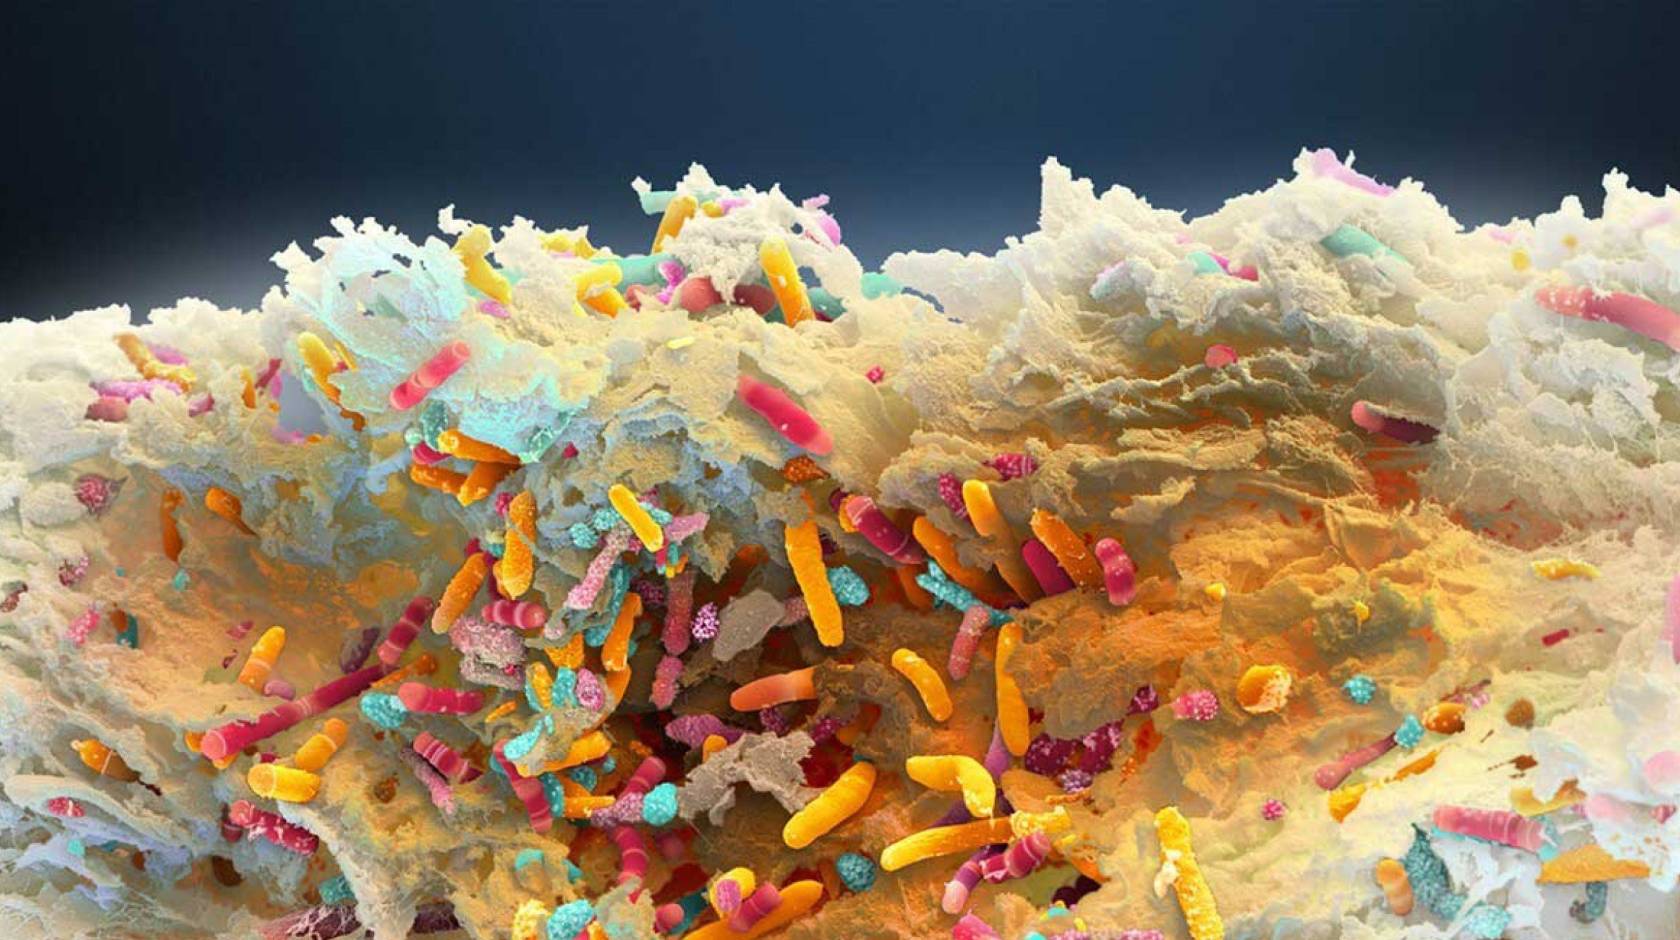 Colorful image of the microbiome as seen under a microscope (looks like fabrics from a rug)